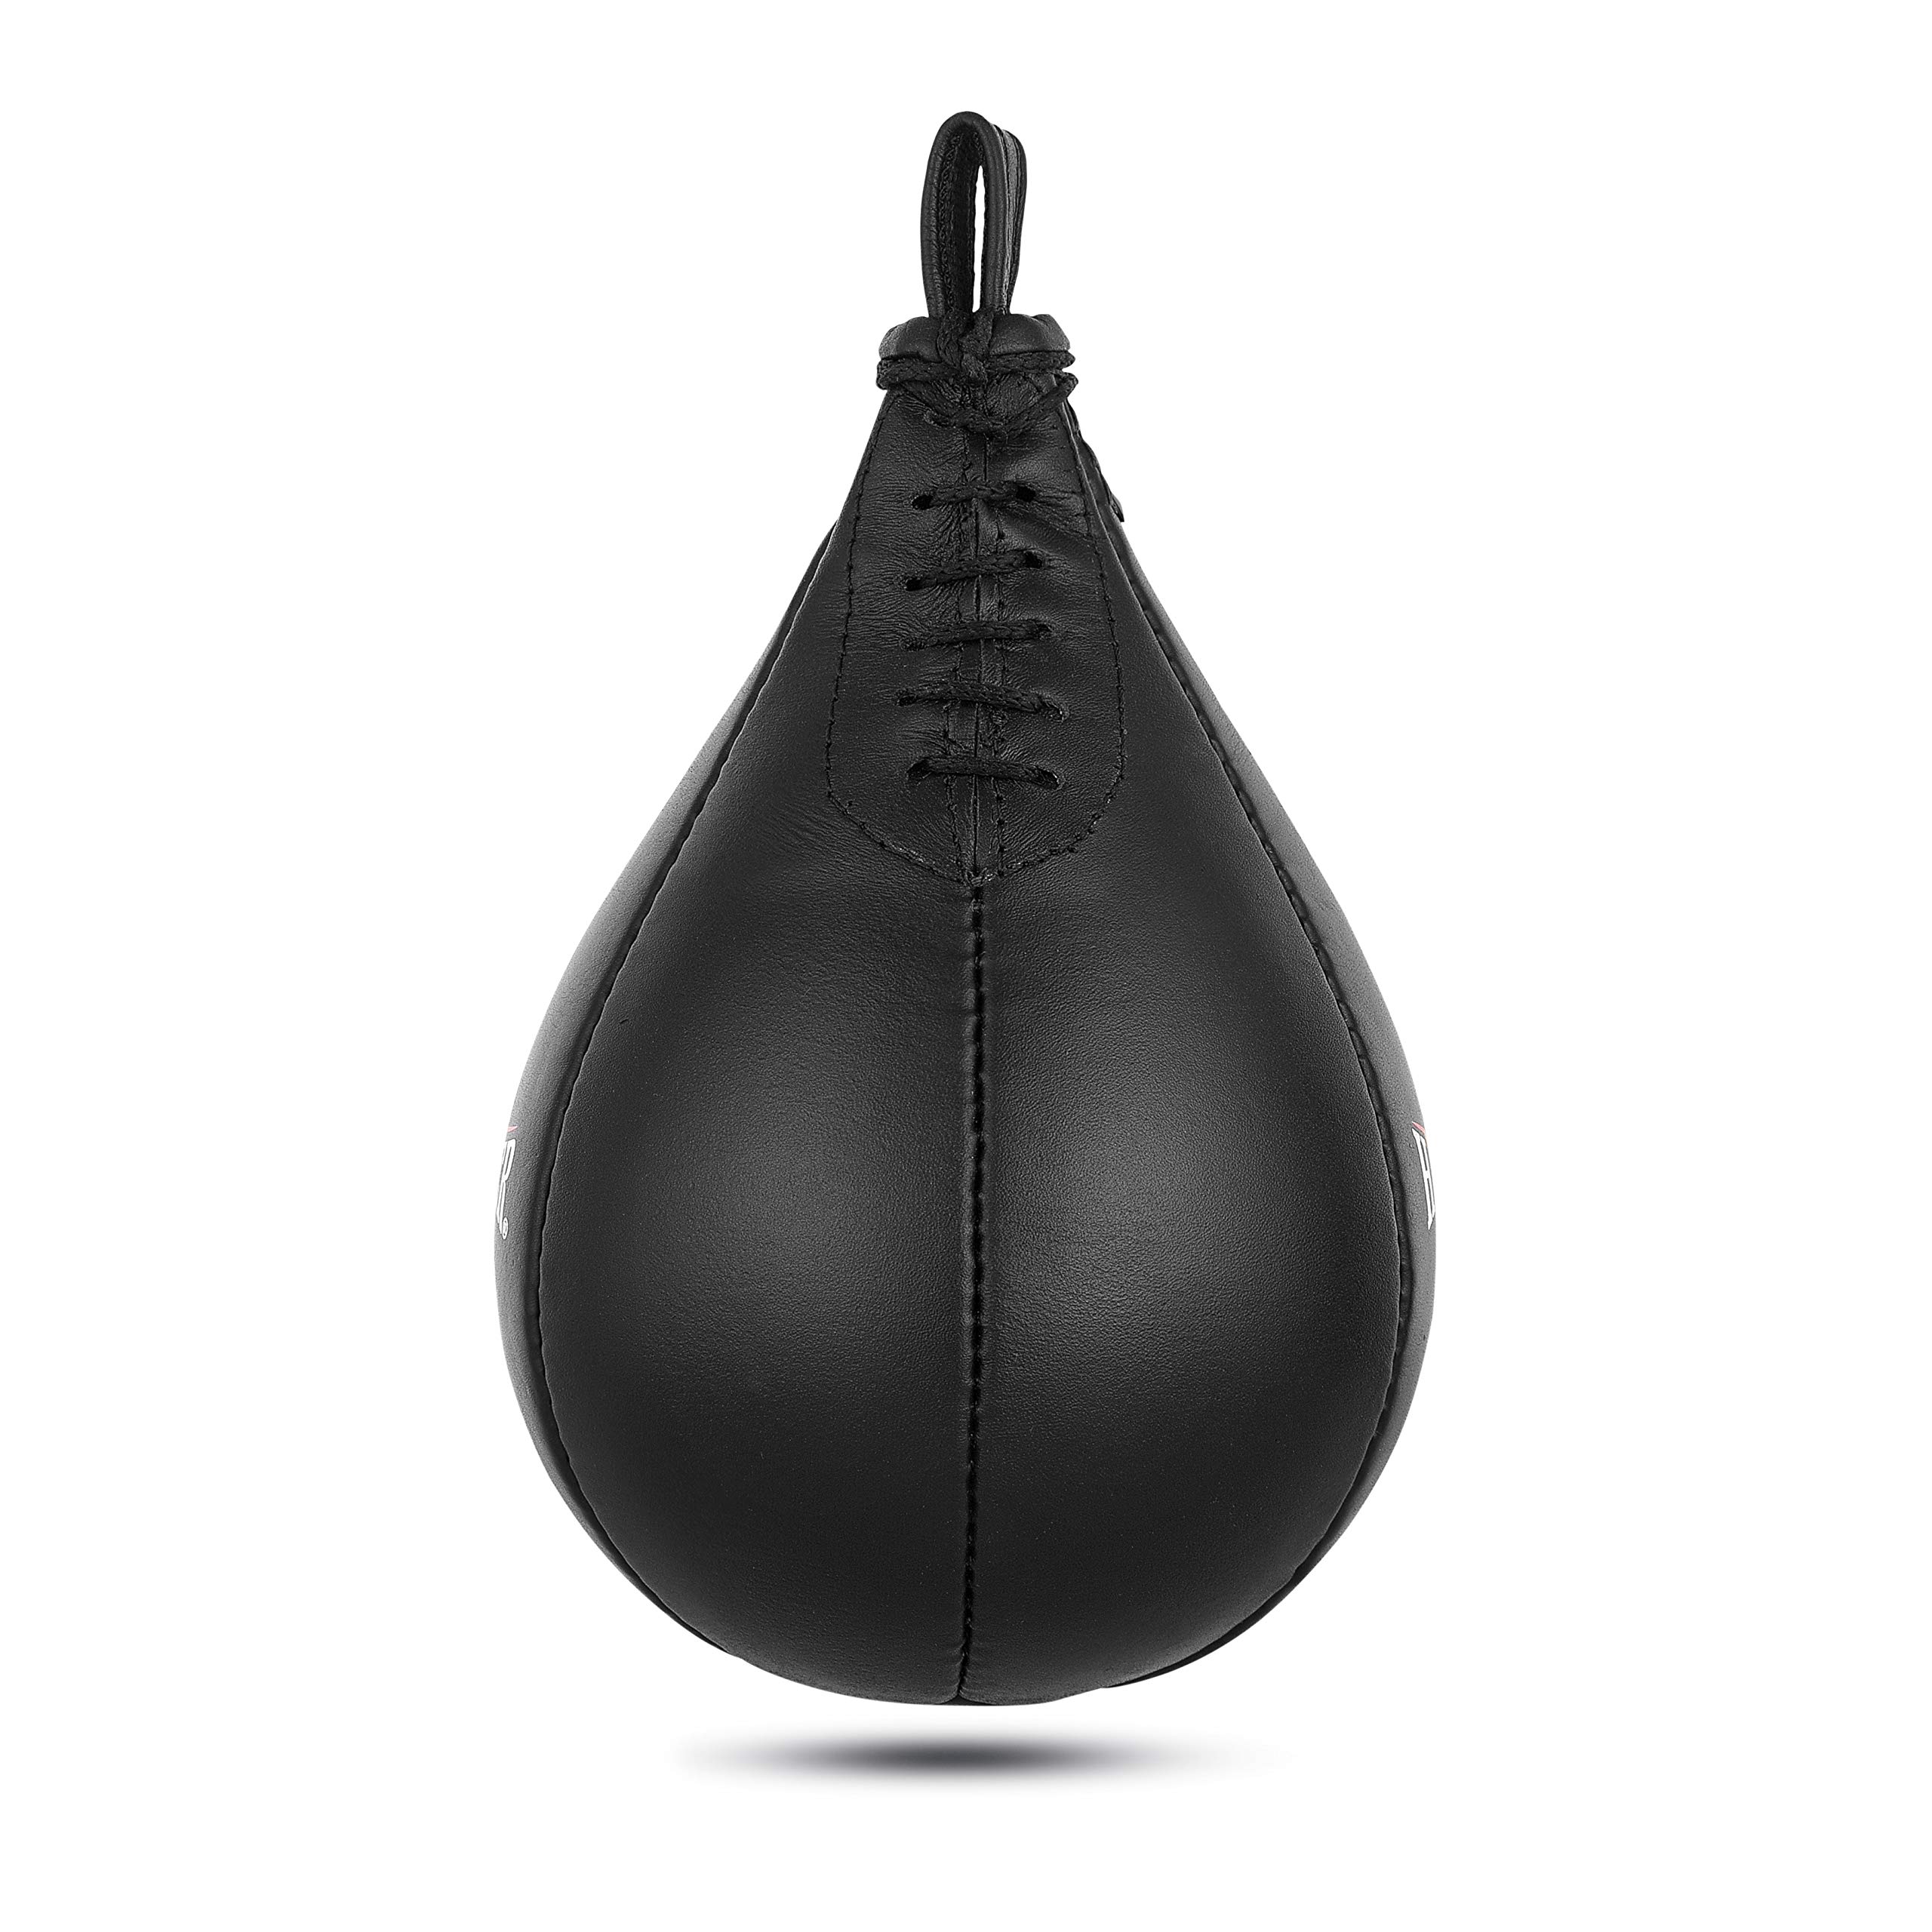 HUNTER Double End Speed Ball Bag Cowhide Leather Boxing Floor to Ceiling Rope MMA Training Muay Thai Punching Dodge Striking...